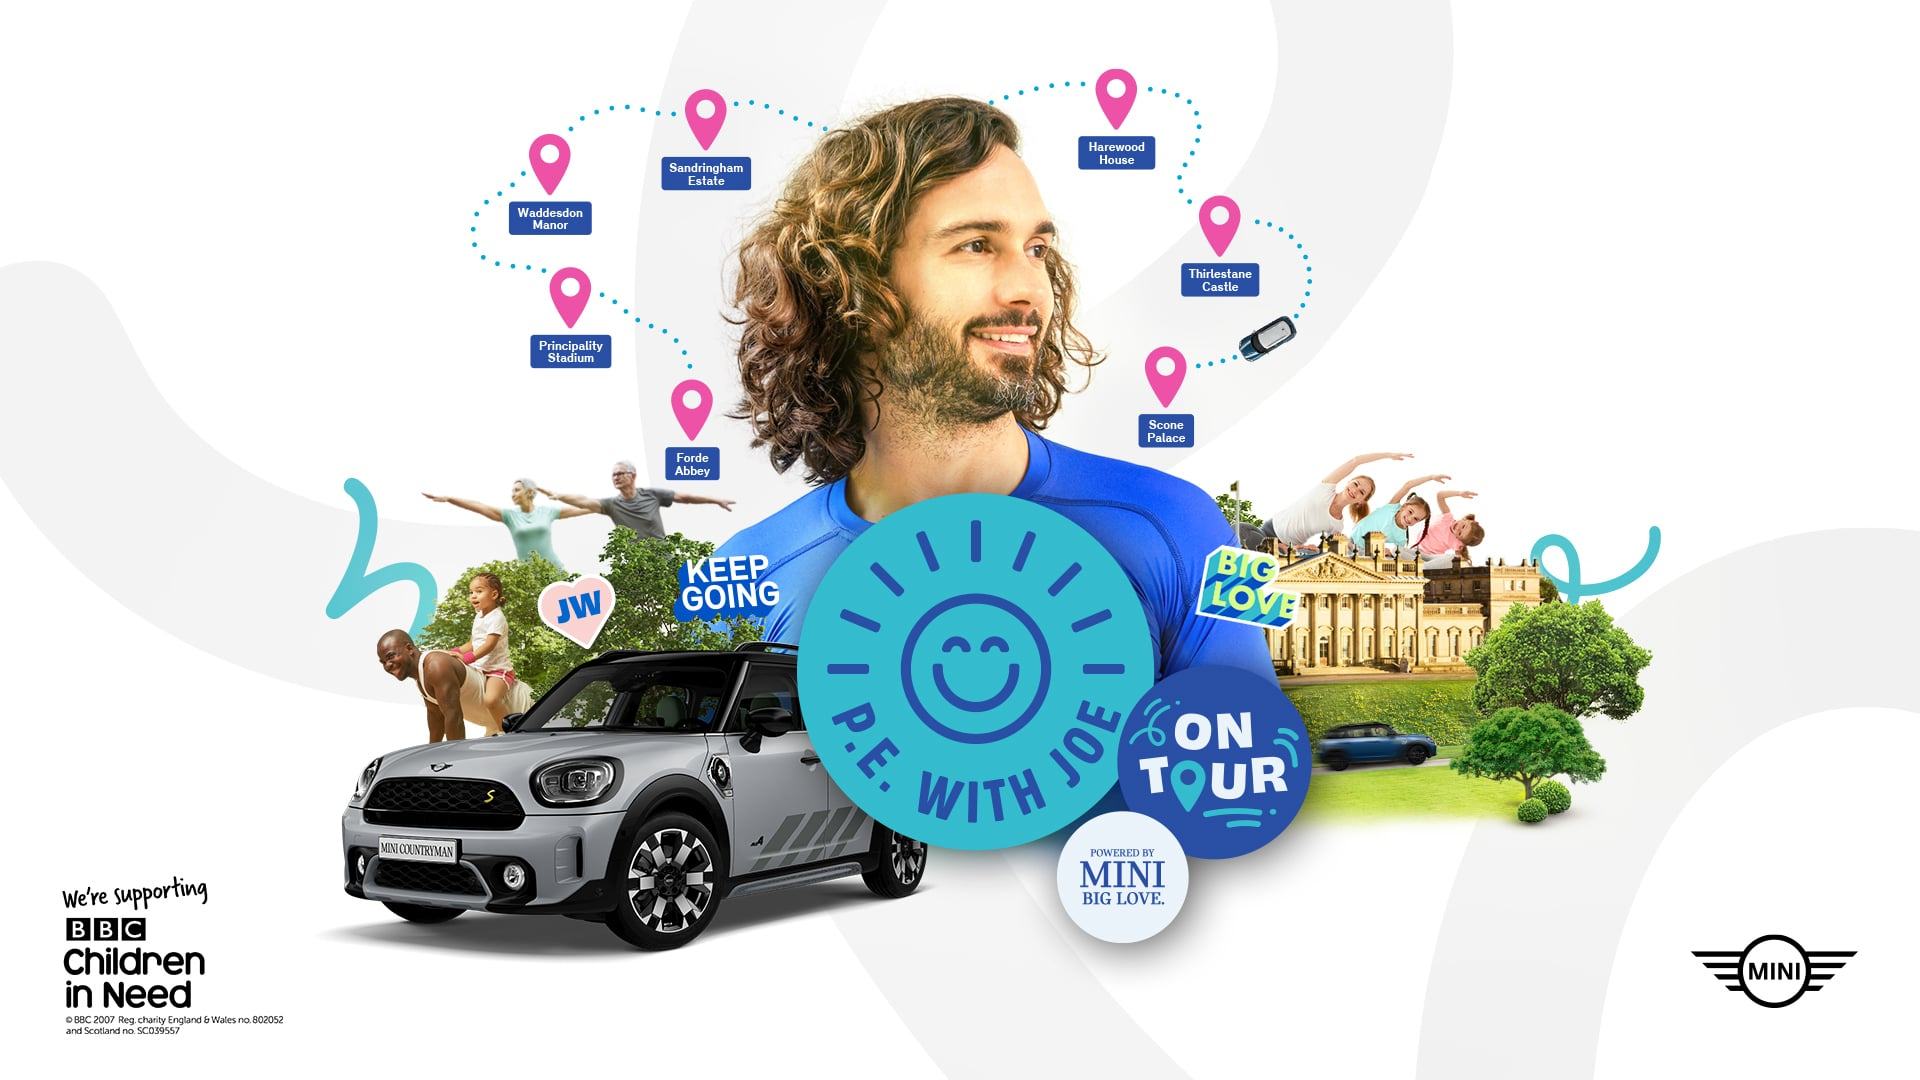 Image name joe wicks on tour mini big love children in need the 19 image from the post Joe Wicks will be at Harewood House in Yorkshire in Yorkshire.com.